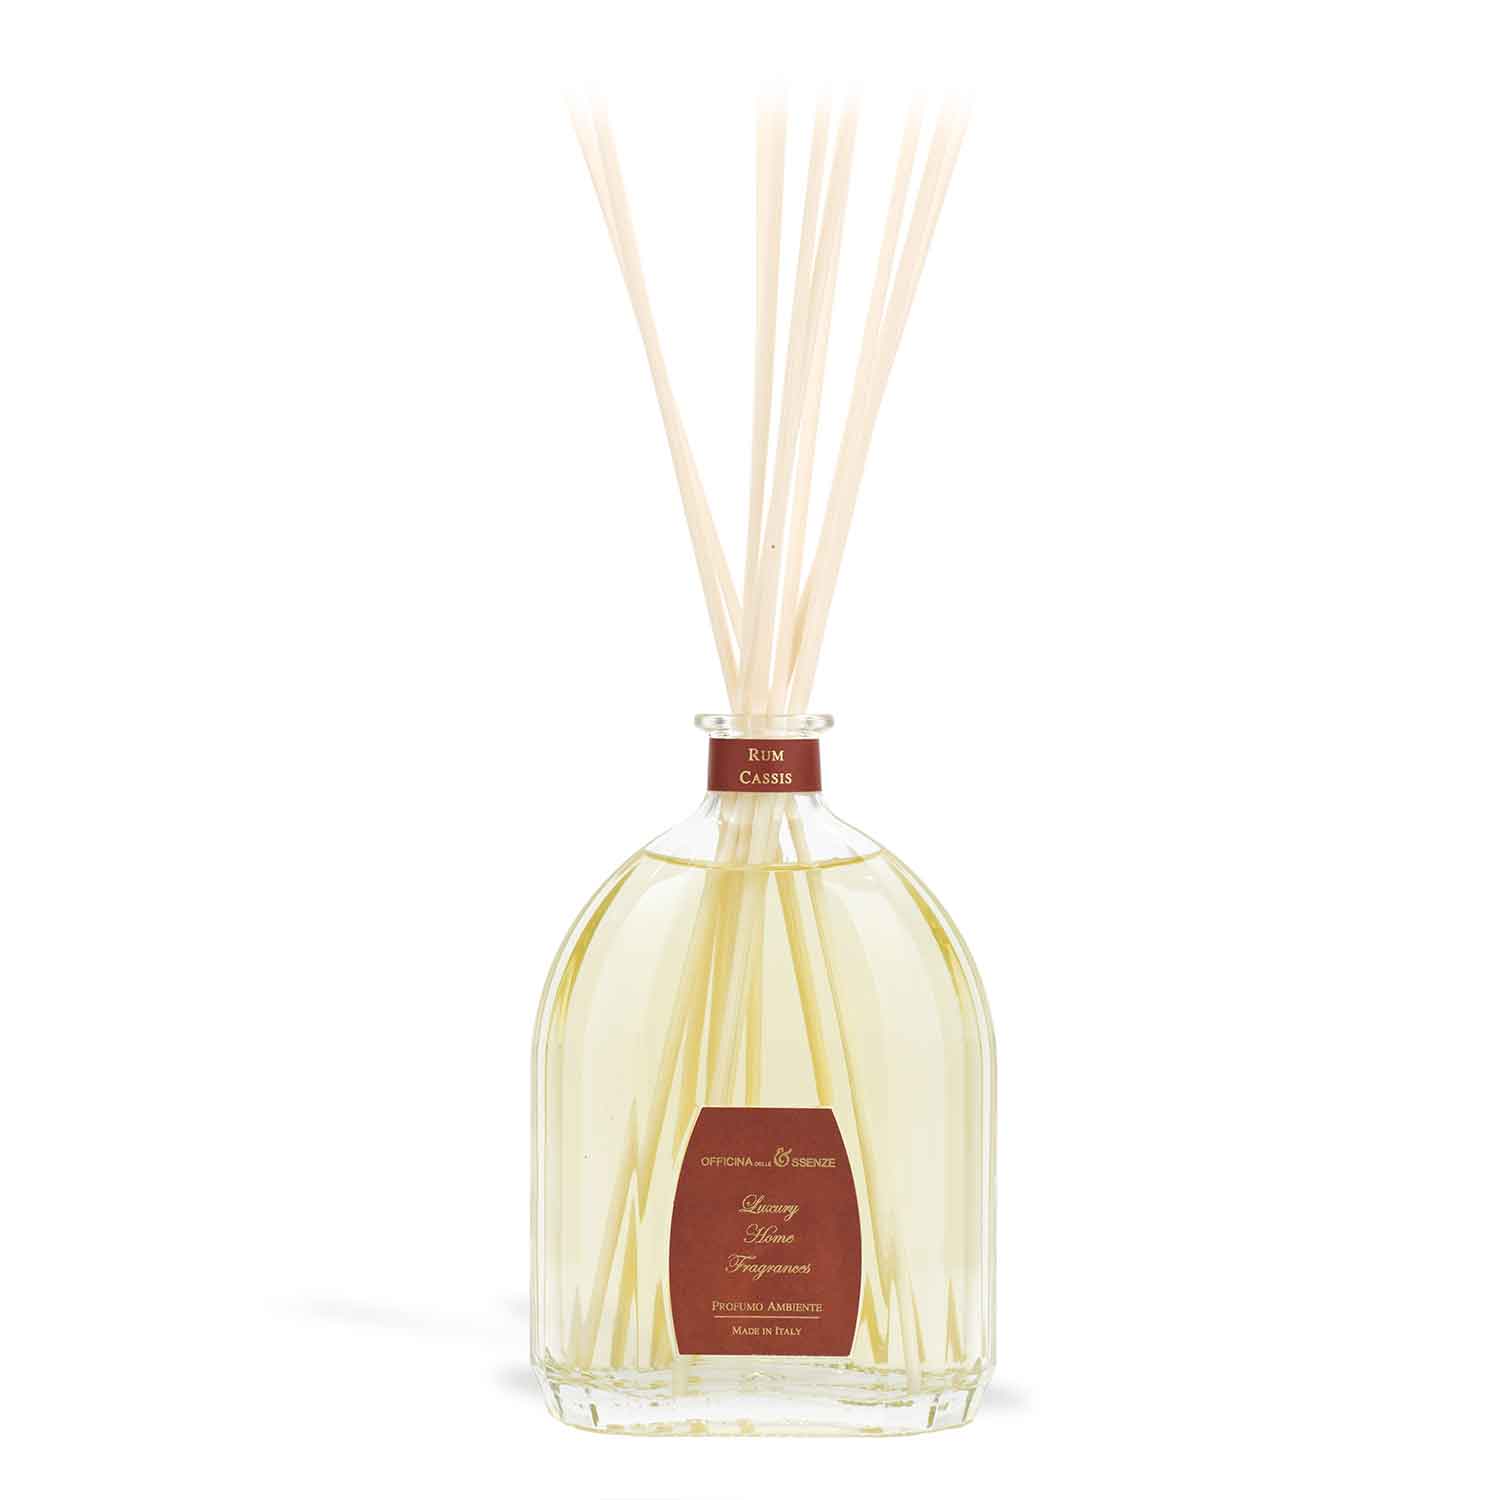 Rum Cassis - Home fragrance diffuser with essential oils, 500 ml